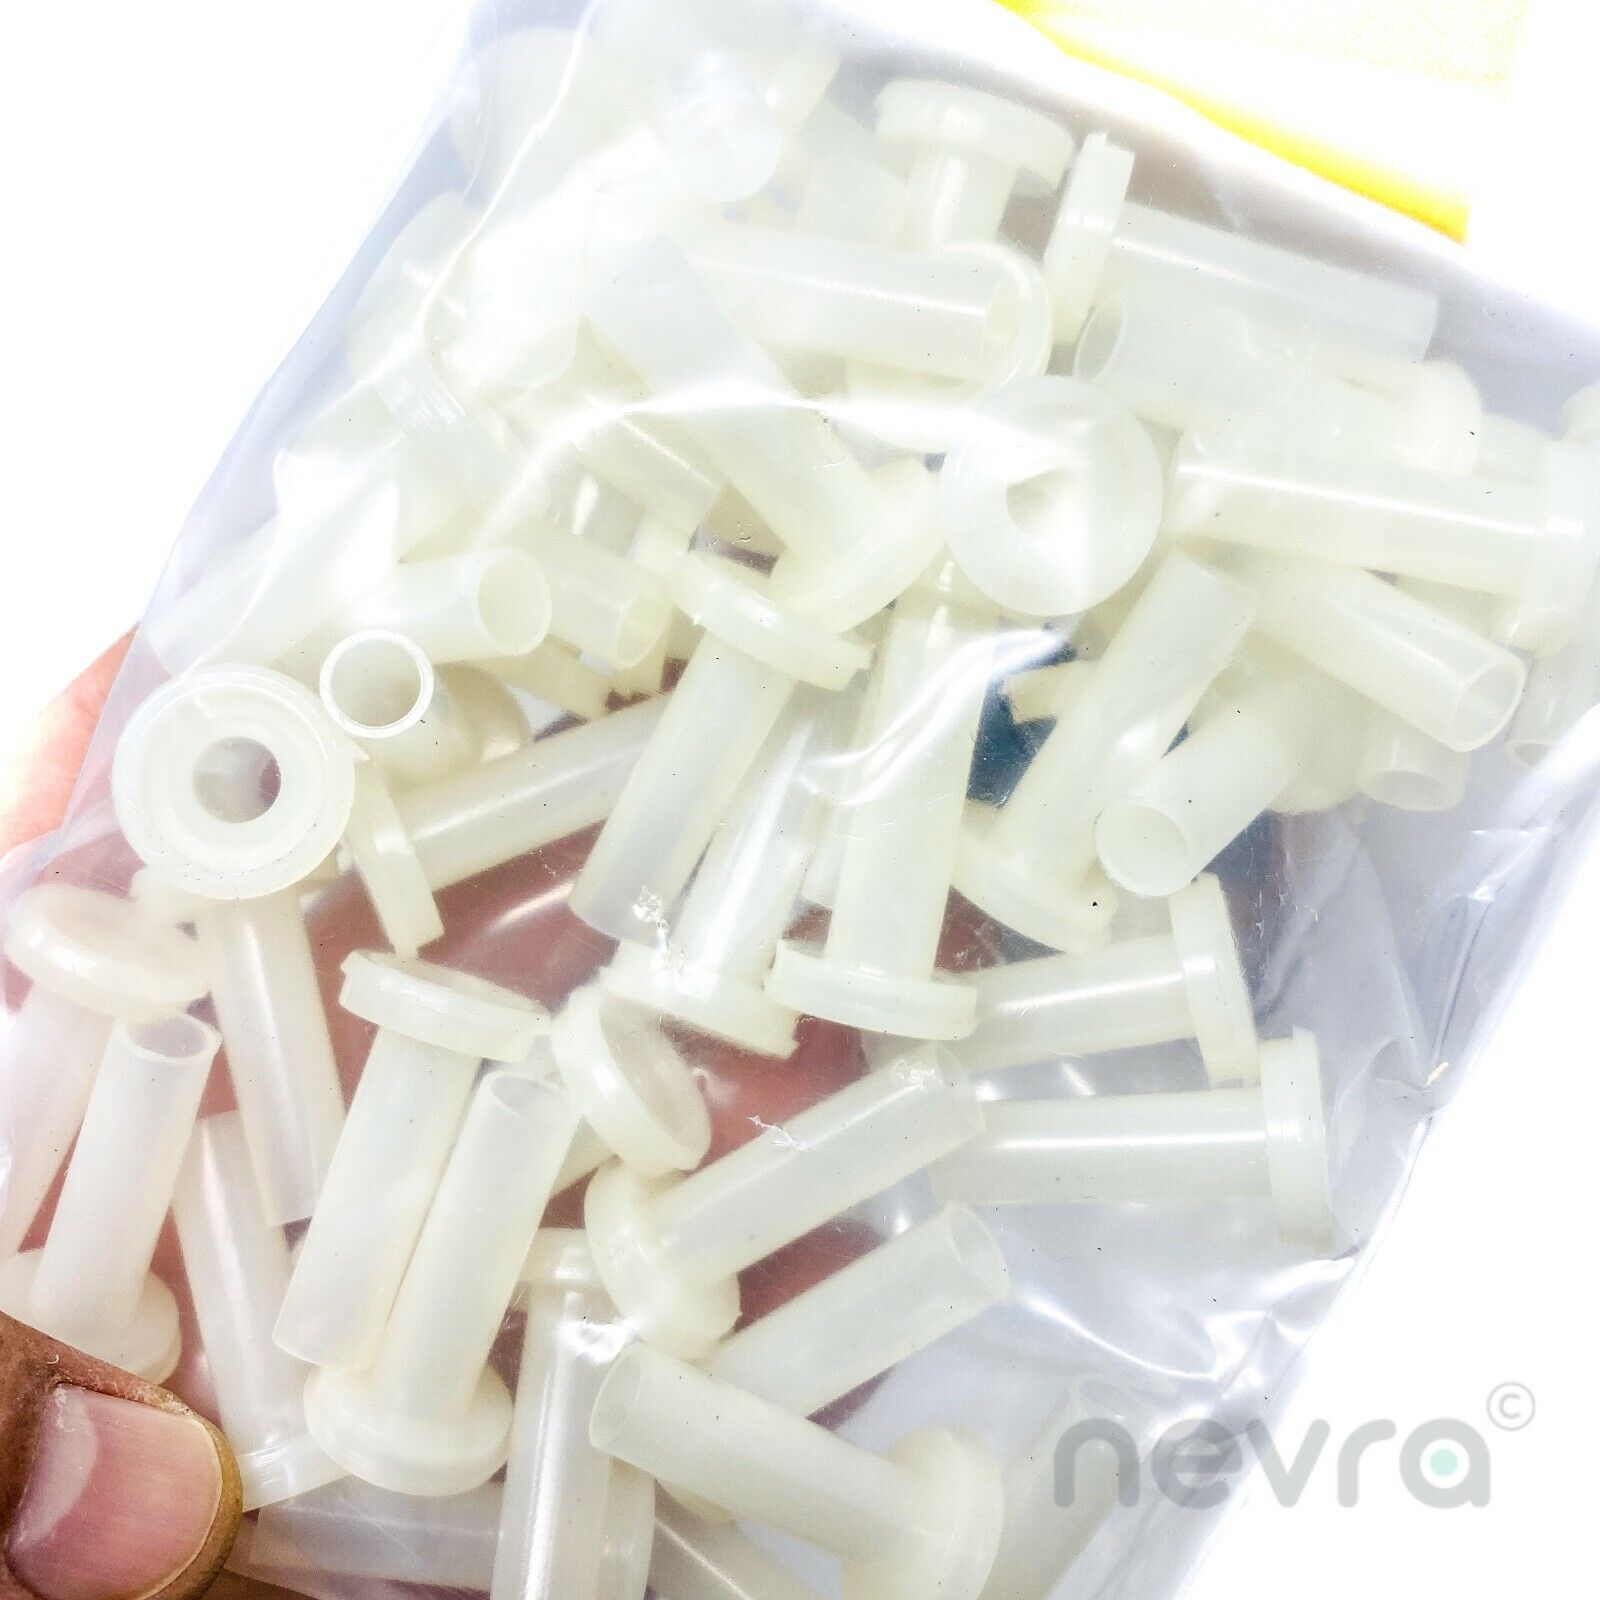 200 pcs Set Pro-Tect WHITE Blue-Tap Concrete Screws, Sleeves, Washers and Caps PRO-TECT Does Not Apply - фотография #8